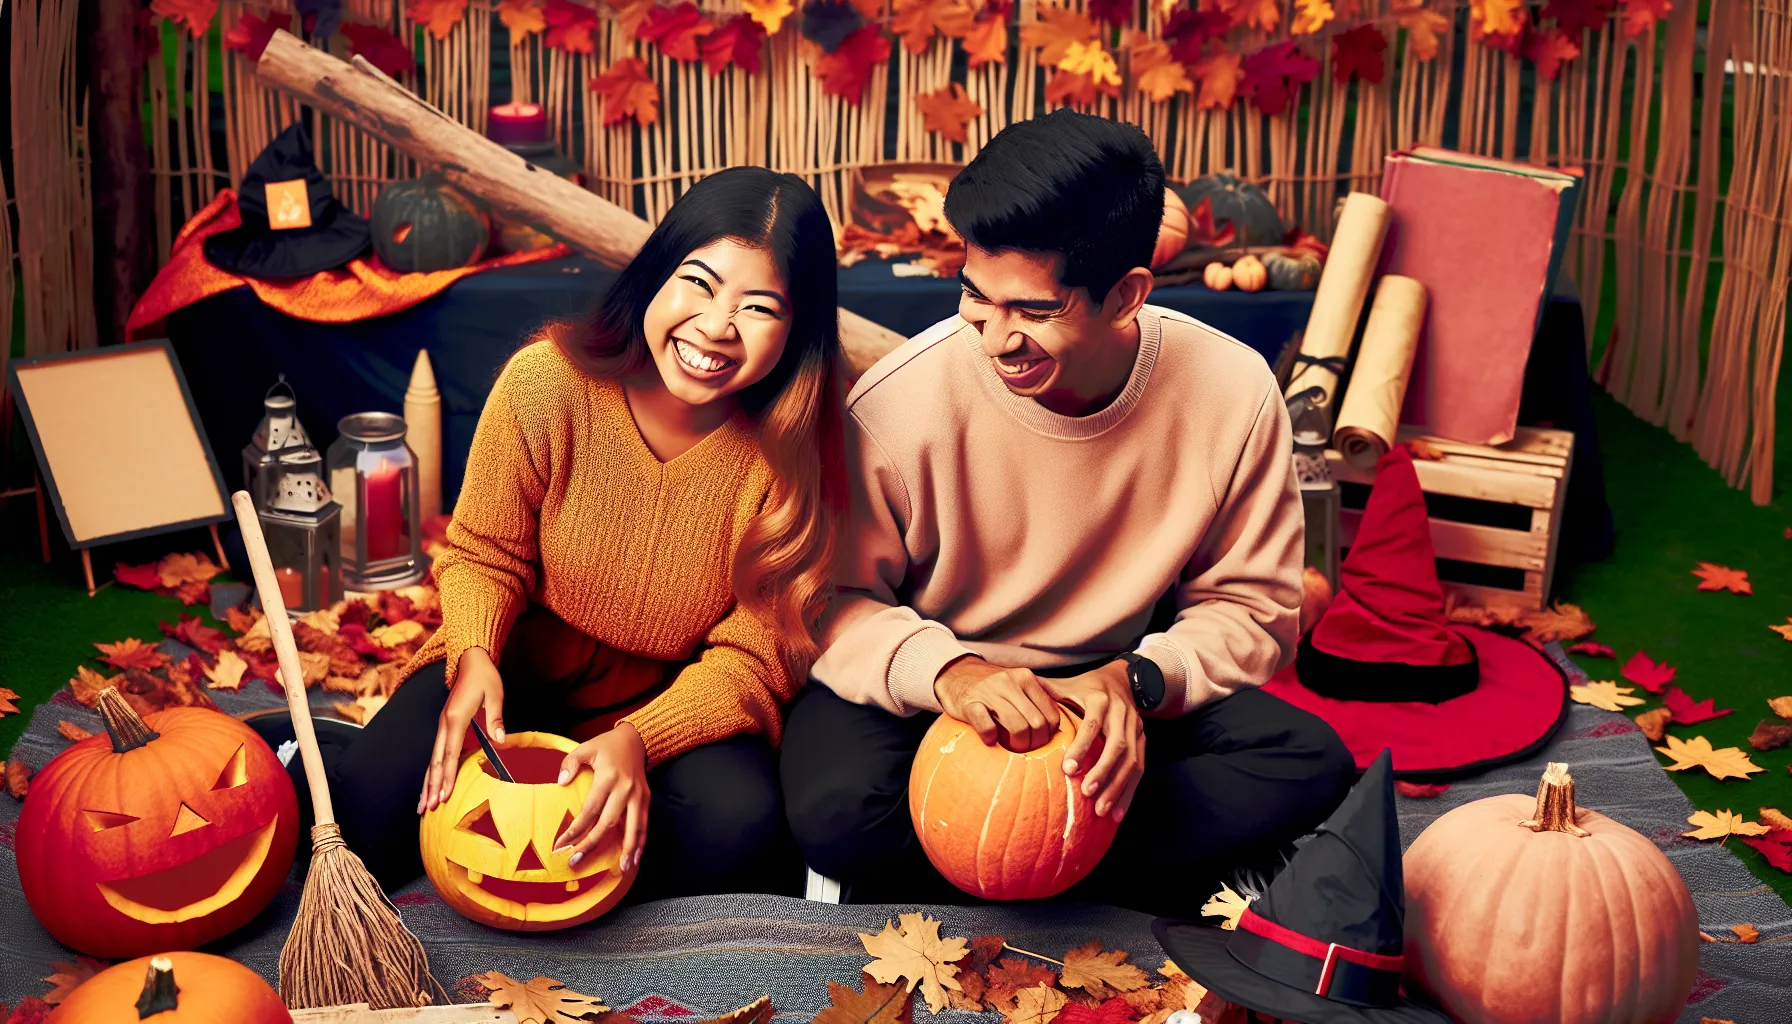 Couple joyfully engaging in pumpkin carving for Halloween